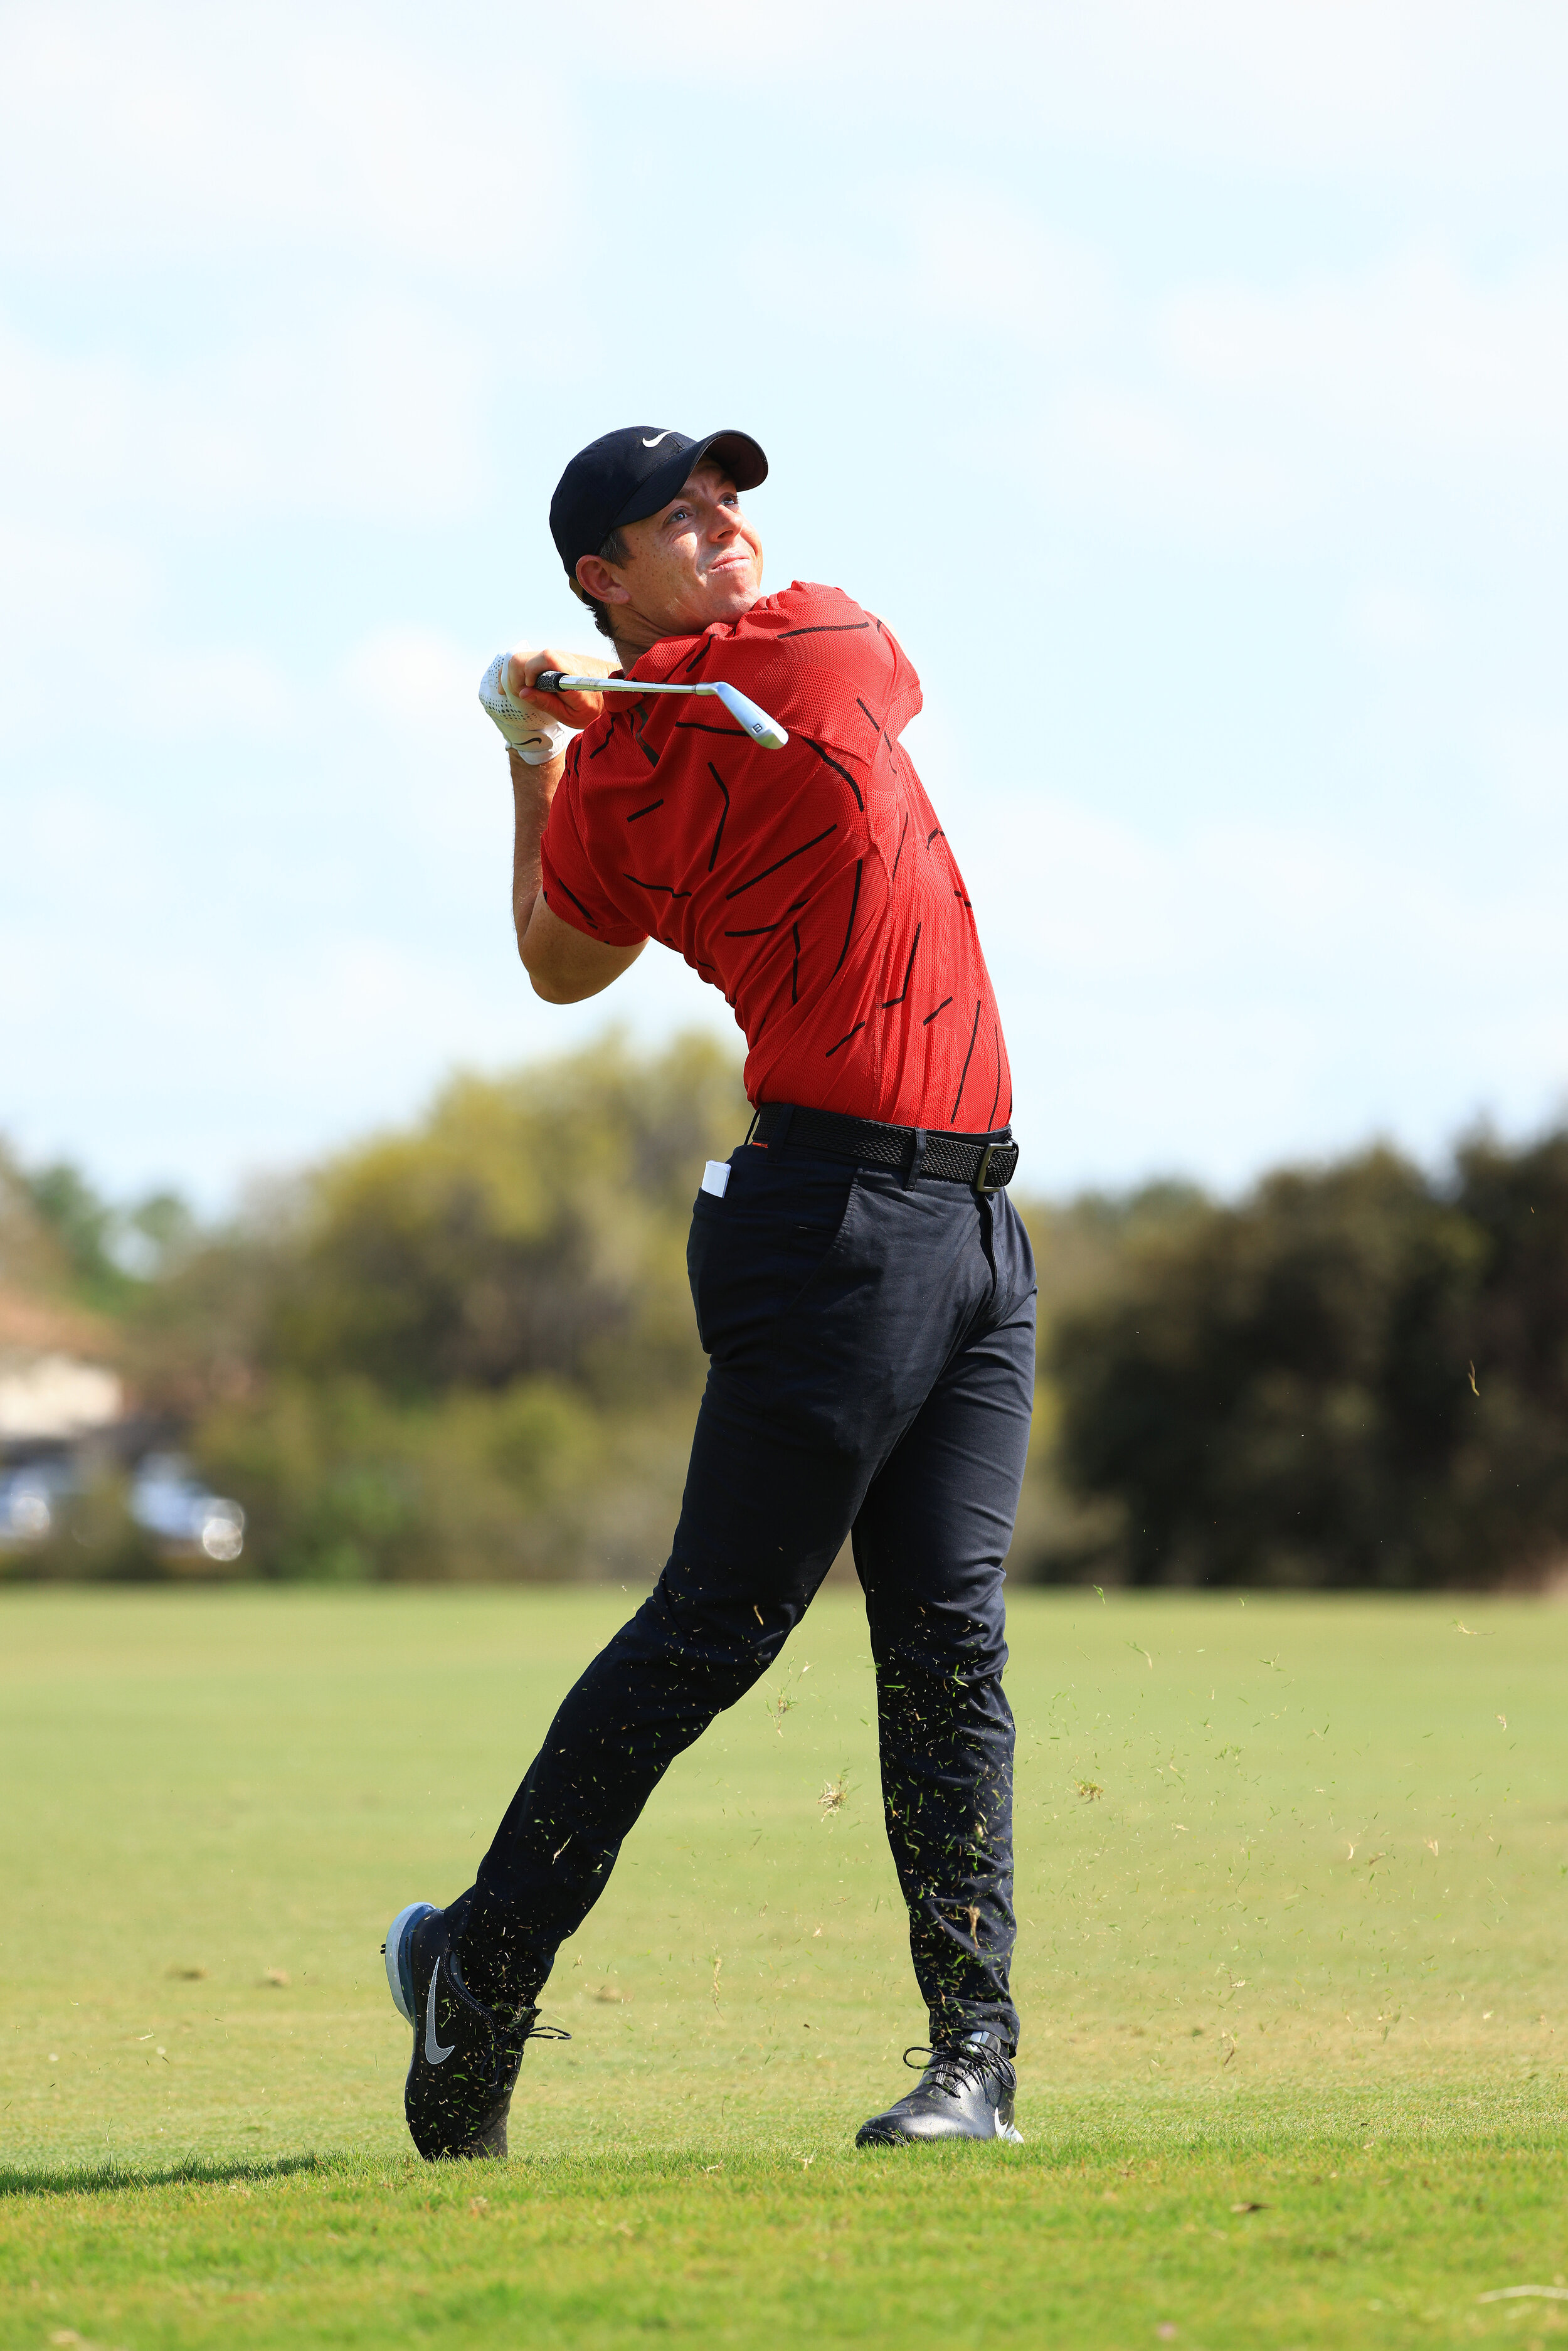  BRADENTON, FLORIDA - FEBRUARY 28: Rory McIlroy of Northern Ireland plays a shot on the third hole during the final round of World Golf Championships-Workday Championship at The Concession on February 28, 2021 in Bradenton, Florida. (Photo by Mike Eh